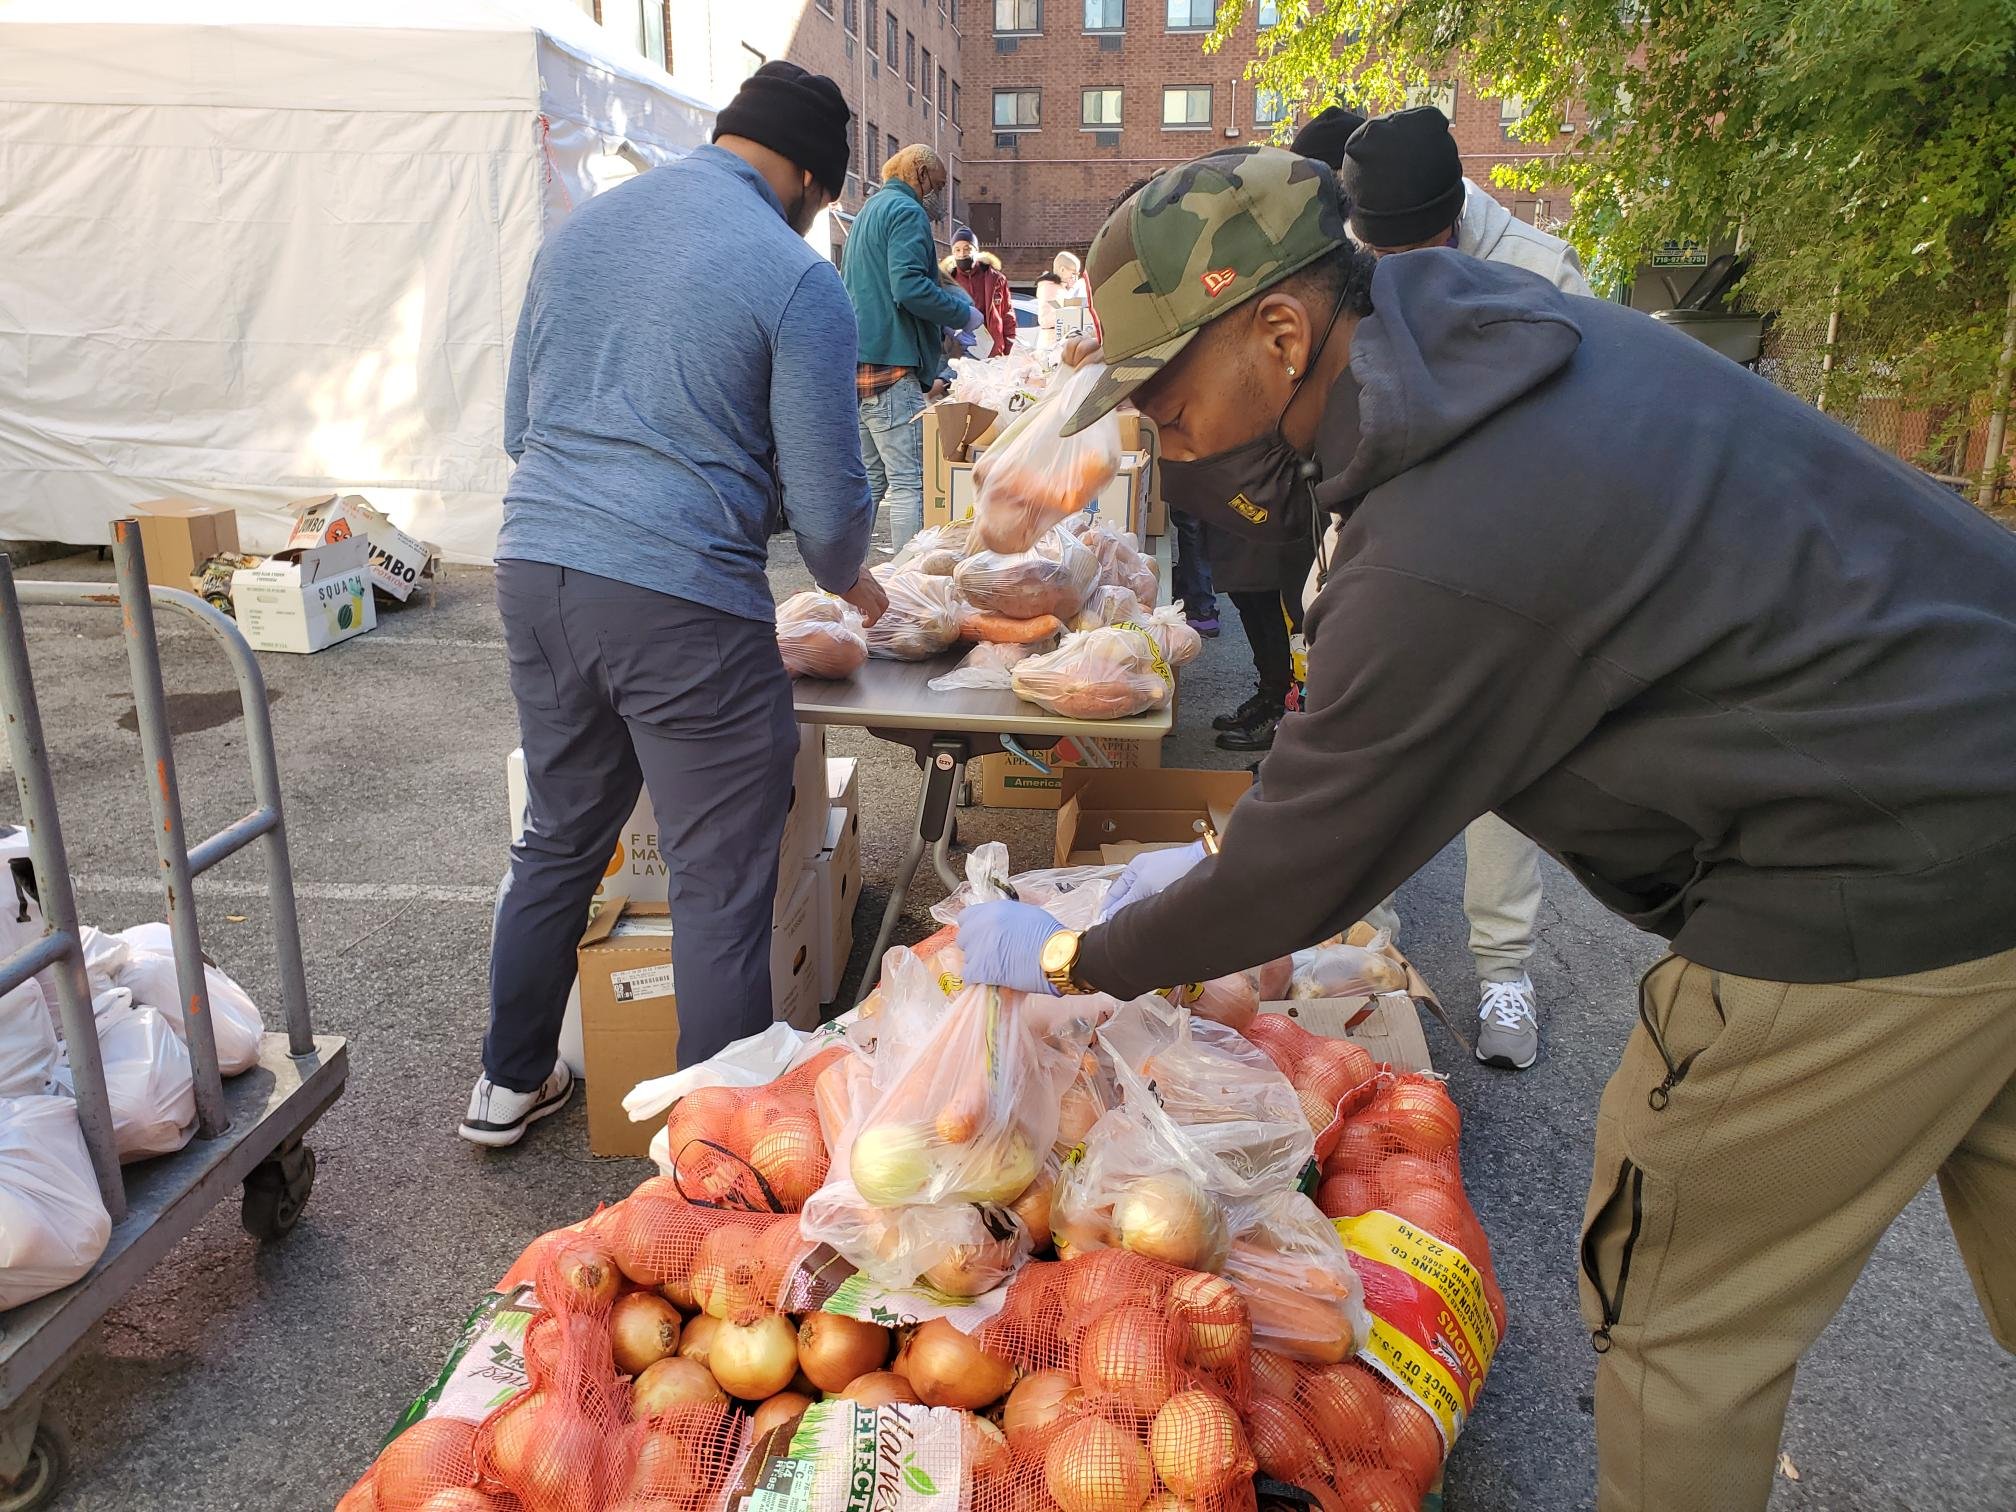 Alliance staff and volunteers arrange produce into take-home bags early in the morning